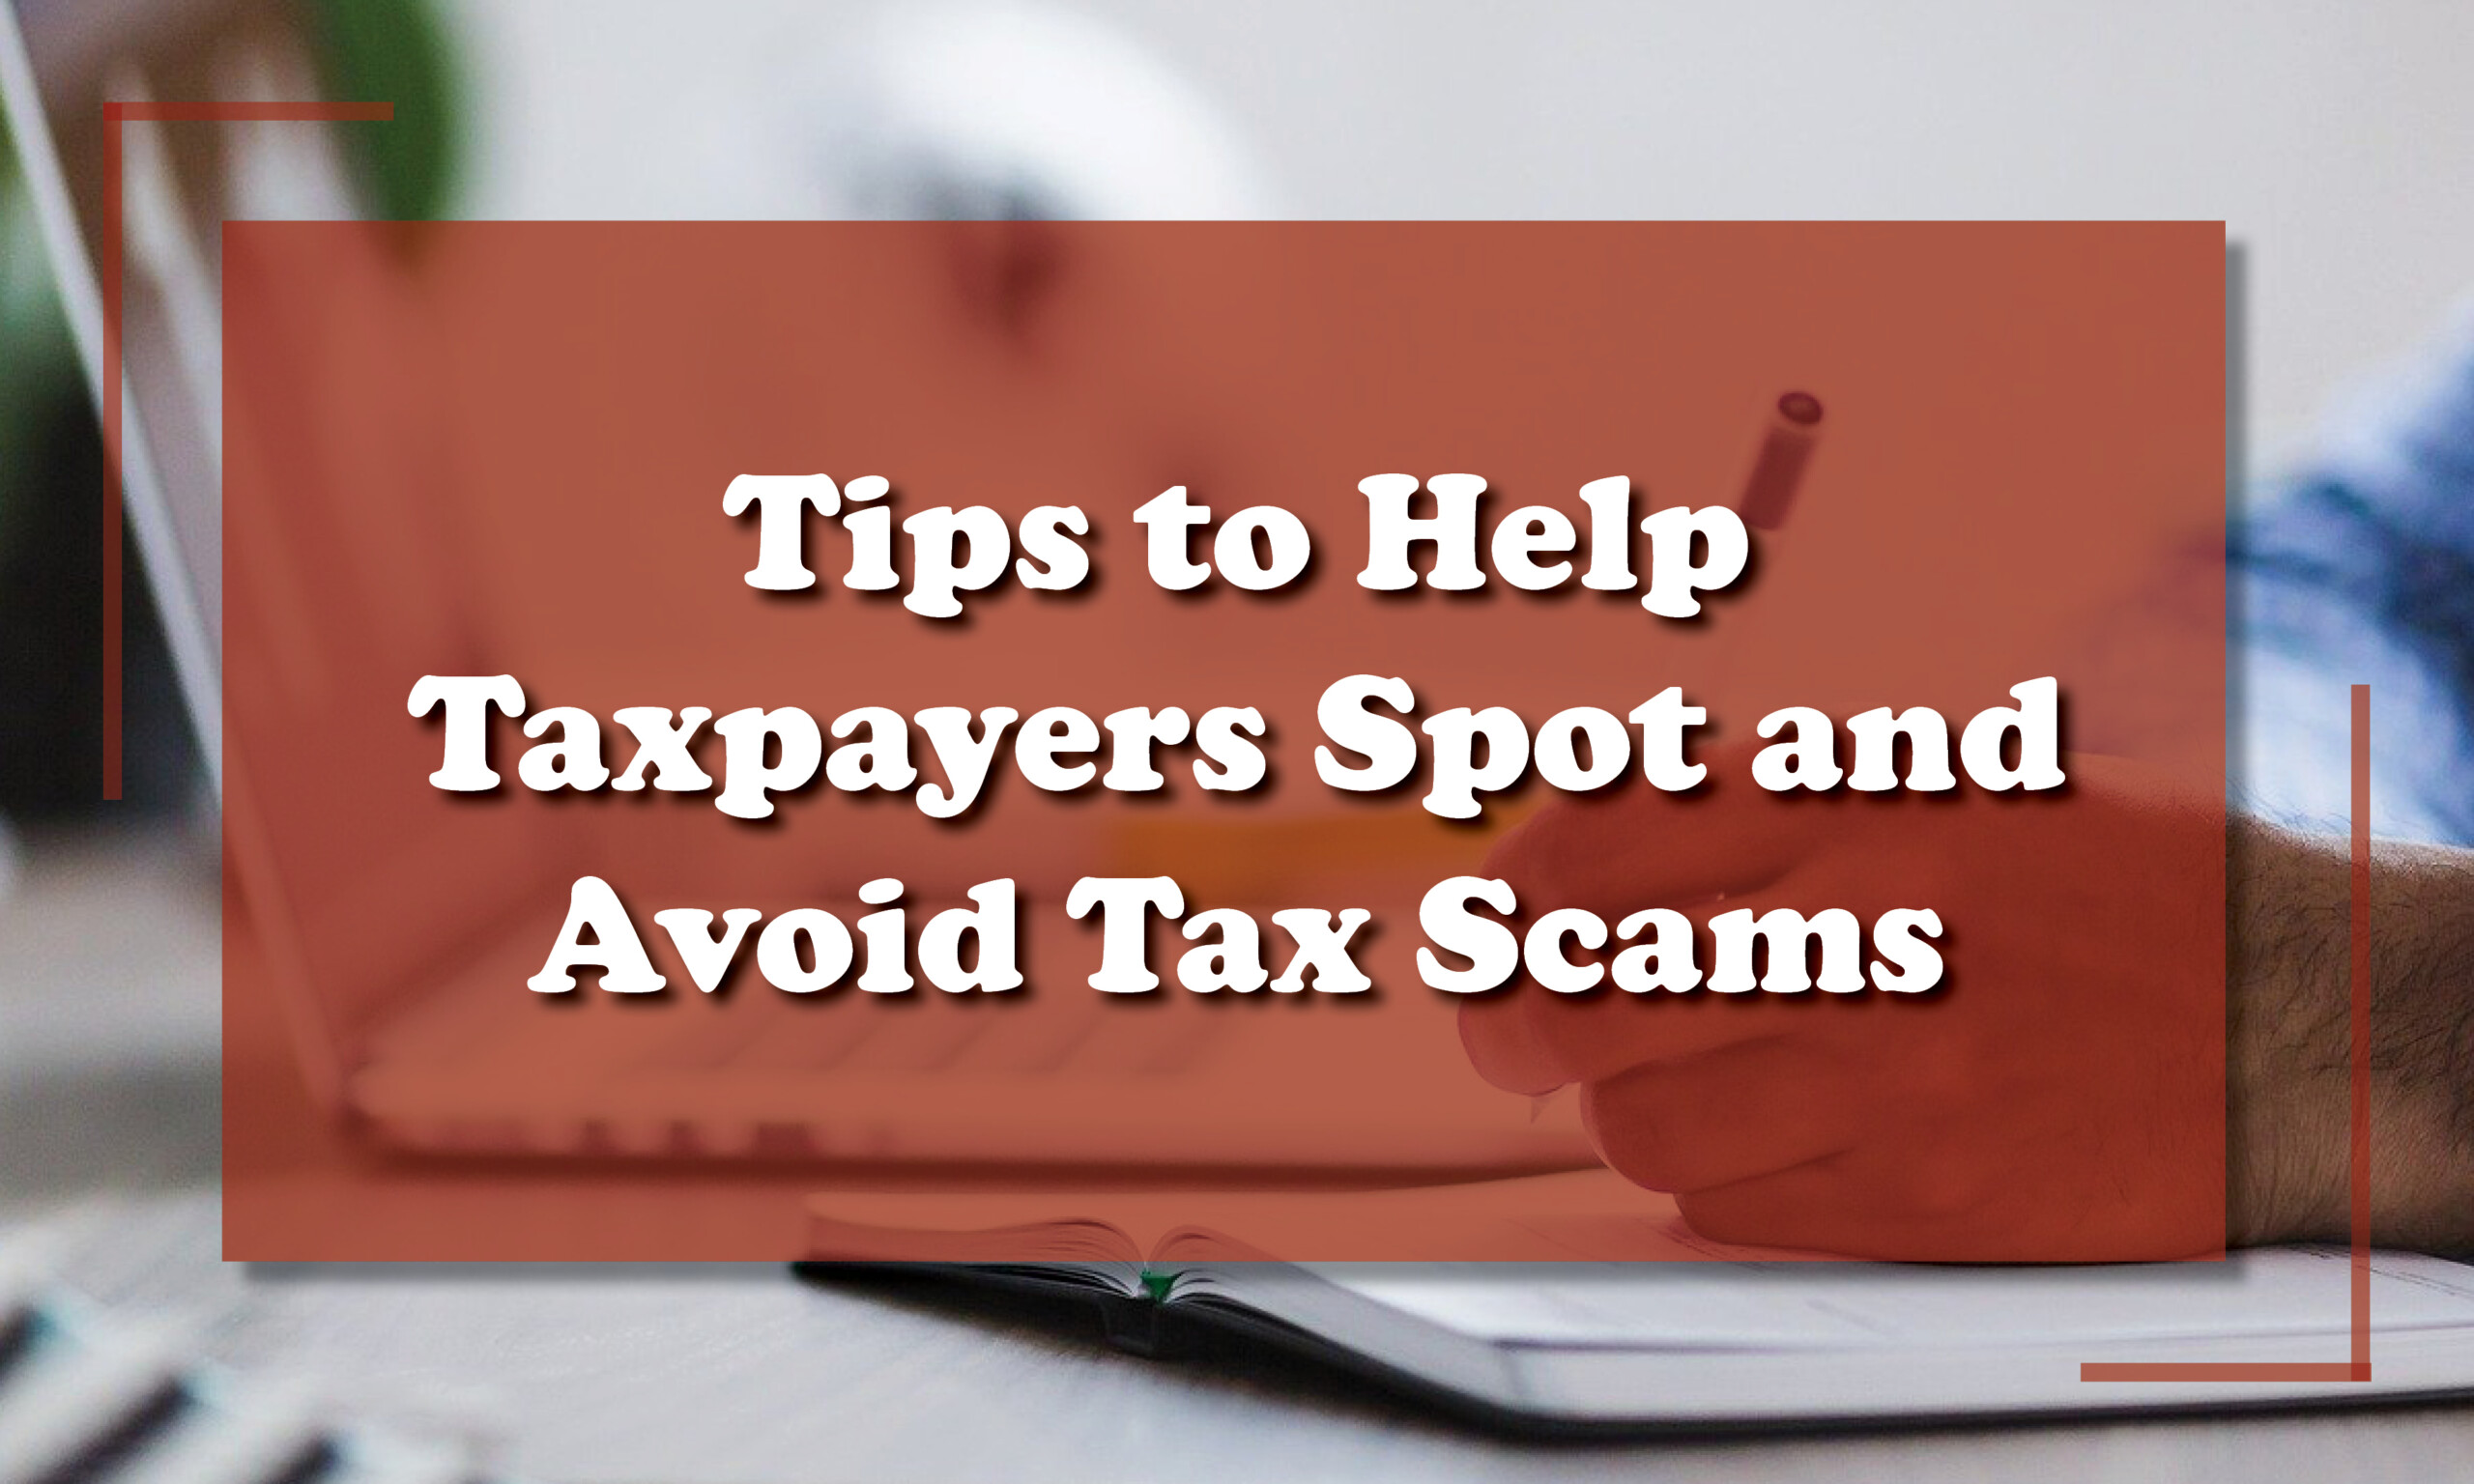 Spot and Avoid Tax Scams